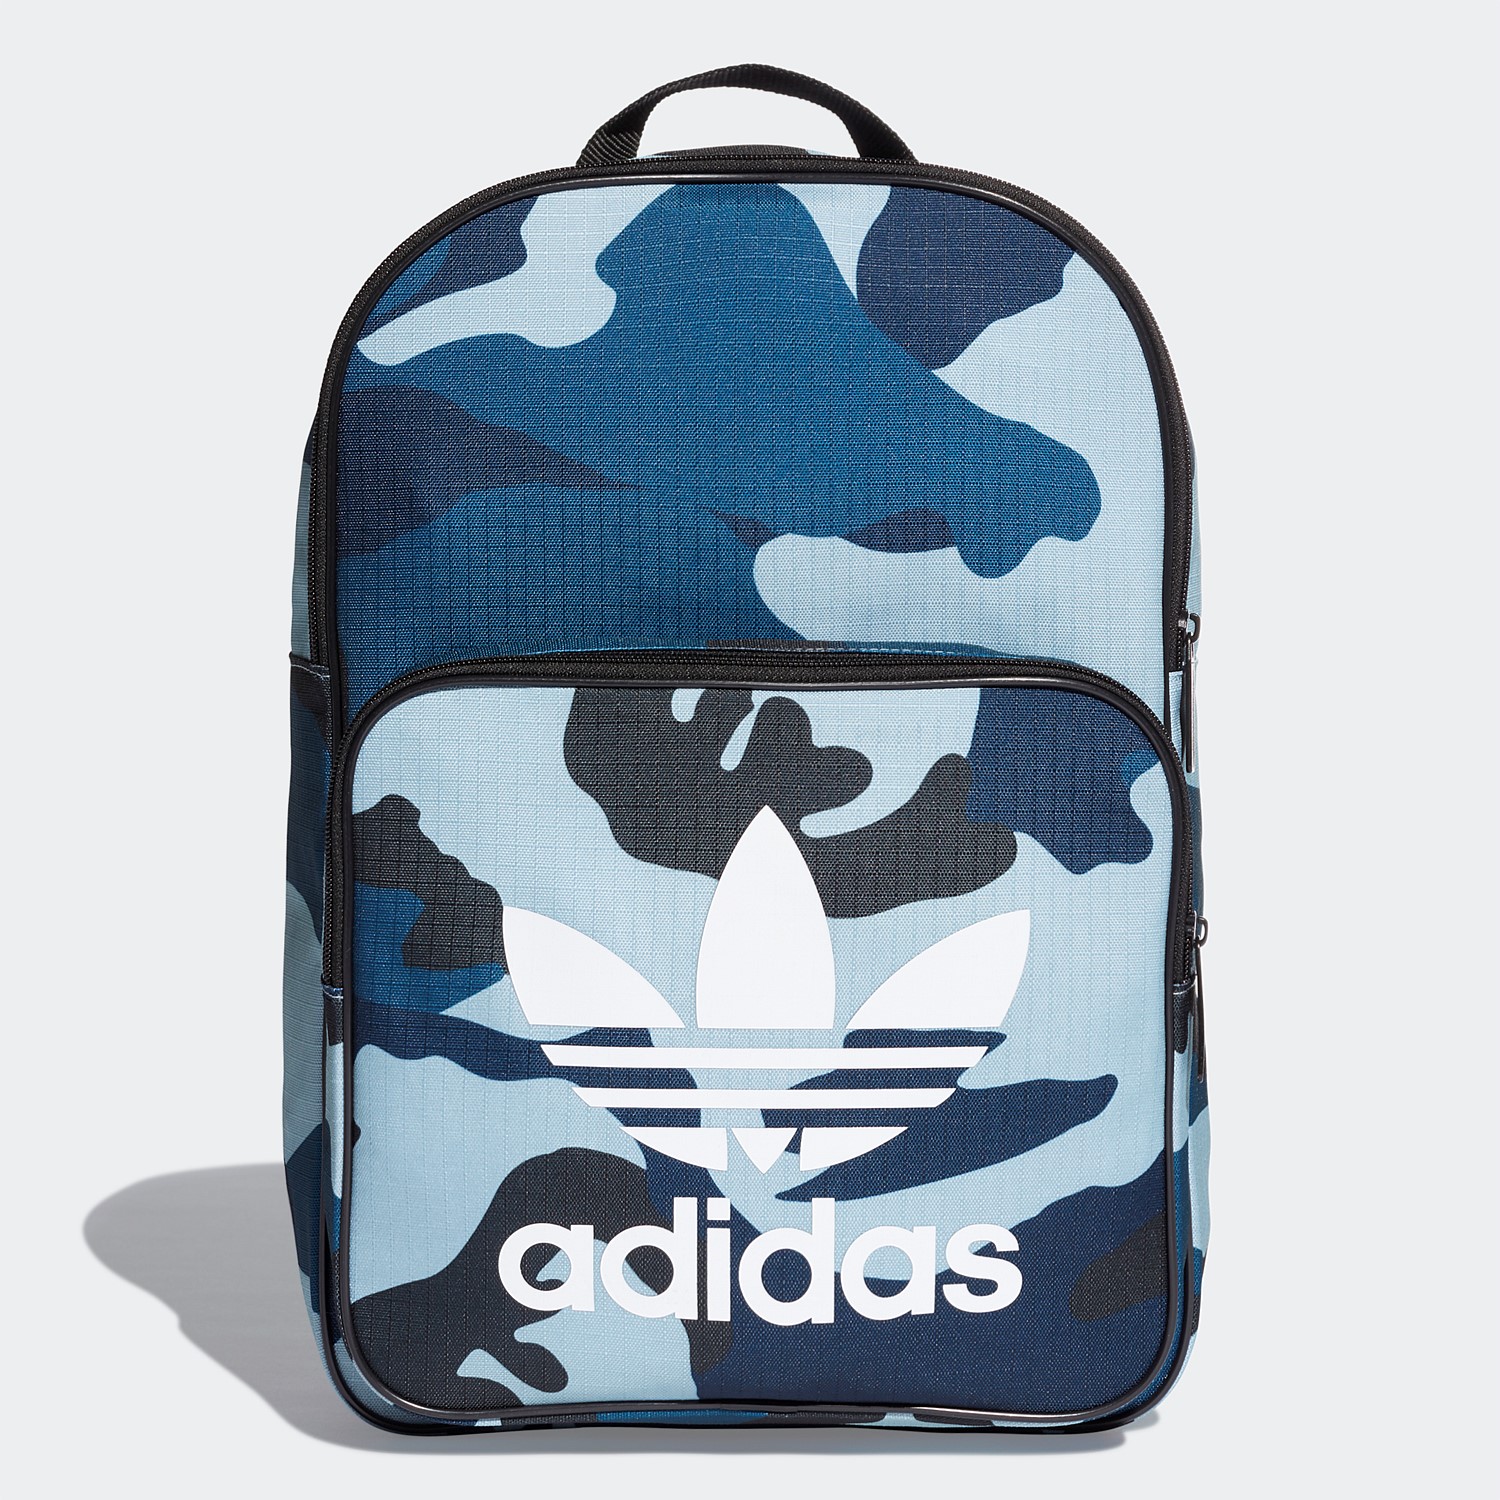 adidas classic camouflage backpack